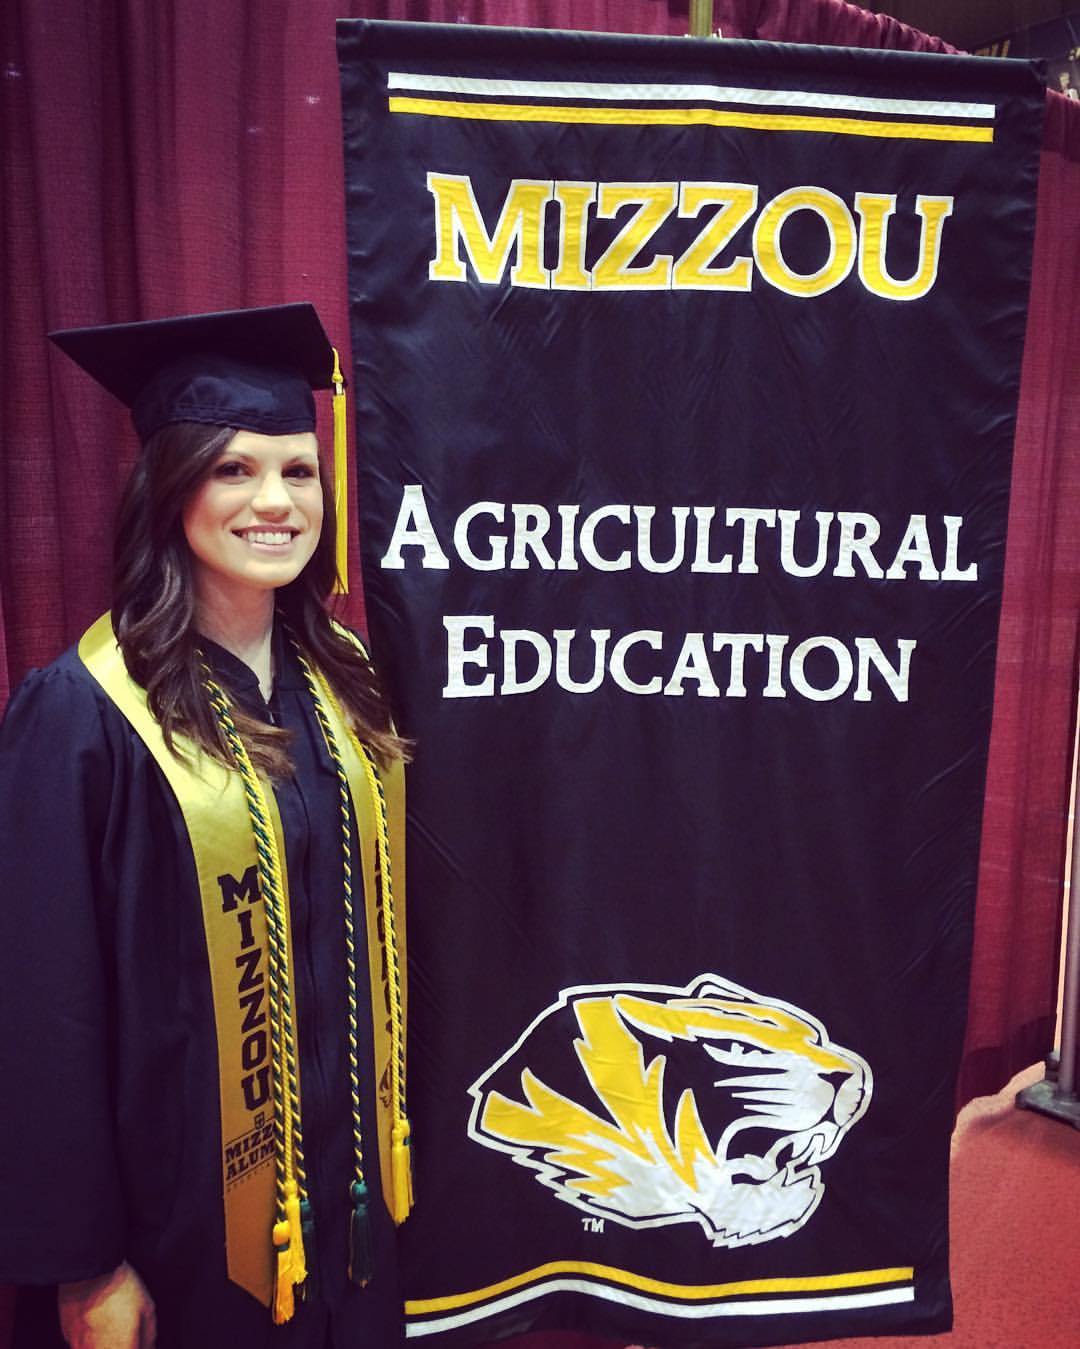 An Opportunity to Share Missouri Agriculture (click to read)